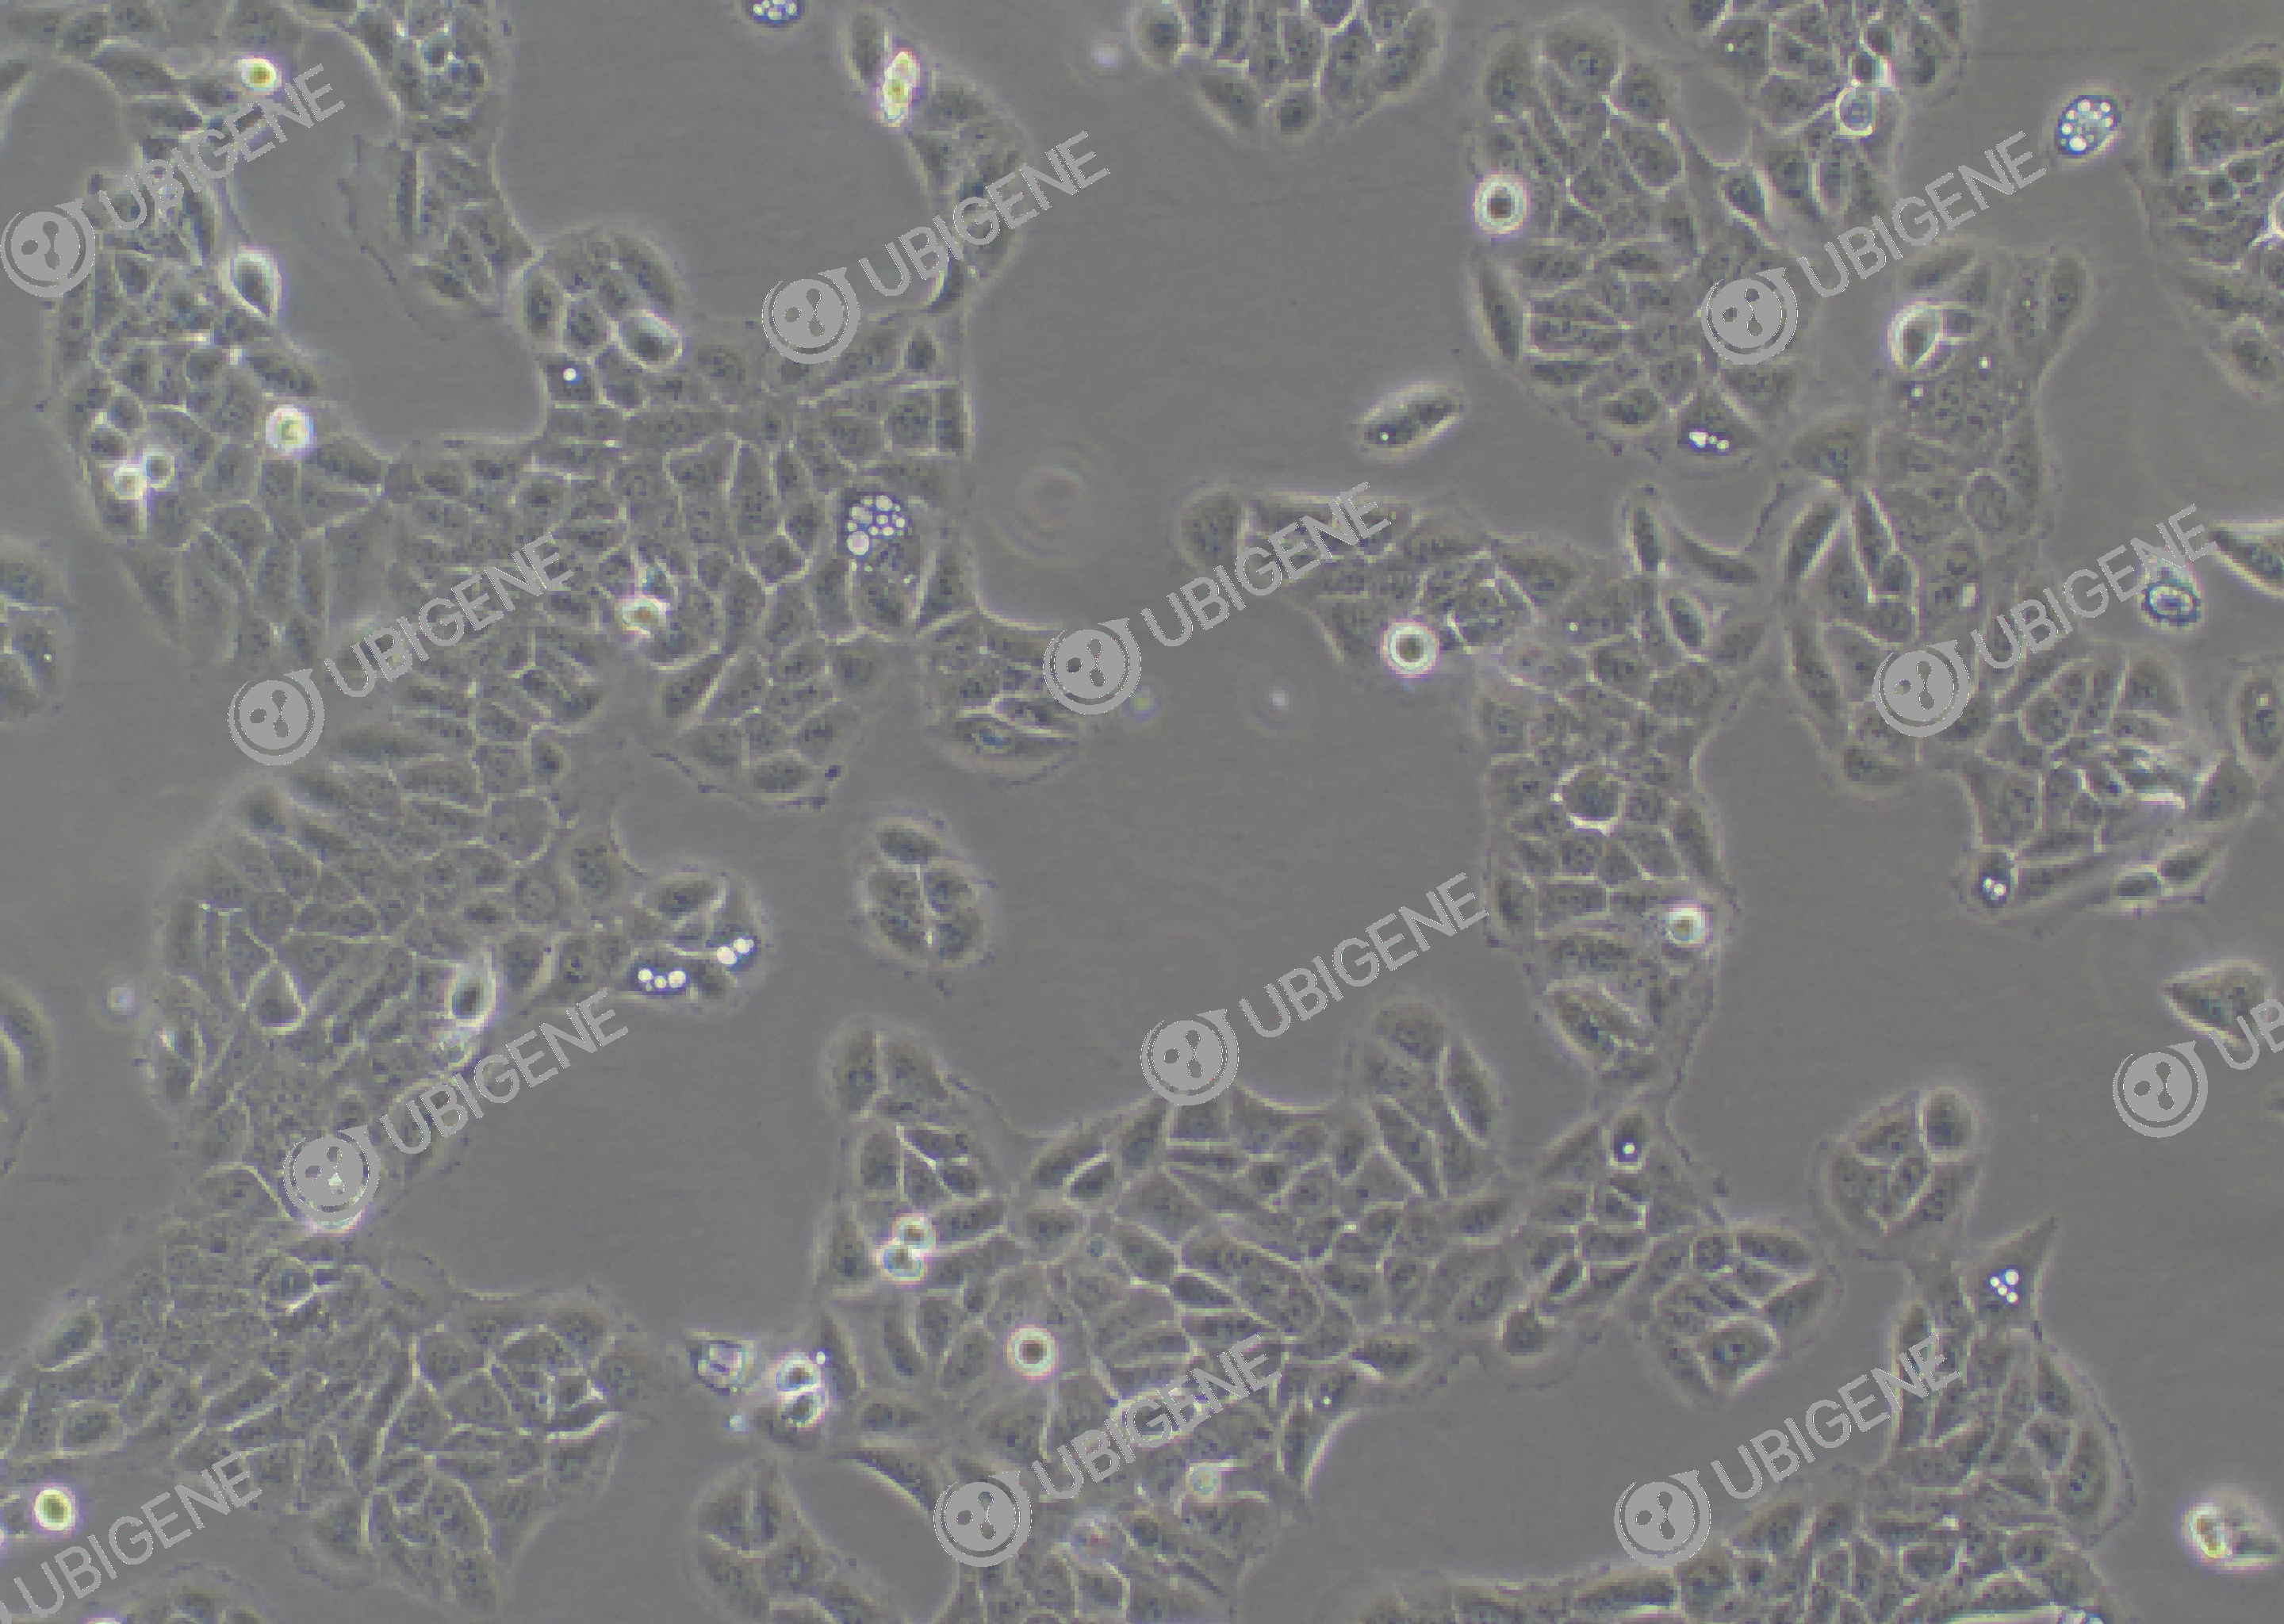 HaCaT cell line Cultured cell morphology